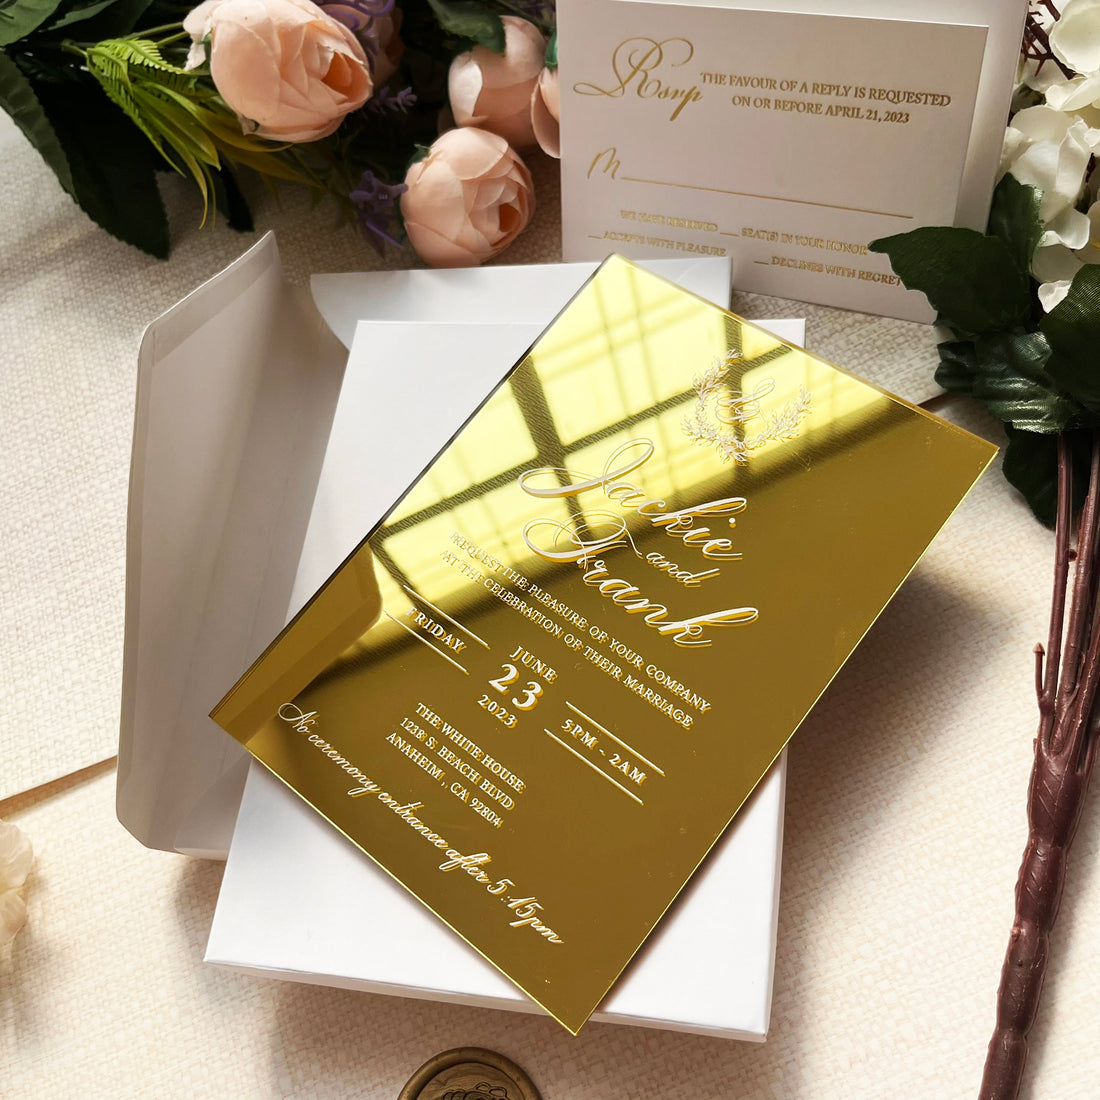 Gold Mirror Wedding Invitations, Wedding Invitation Boxed Design, Minimal Wedding Invite, Wedding Invitation Suite, Sophisticated